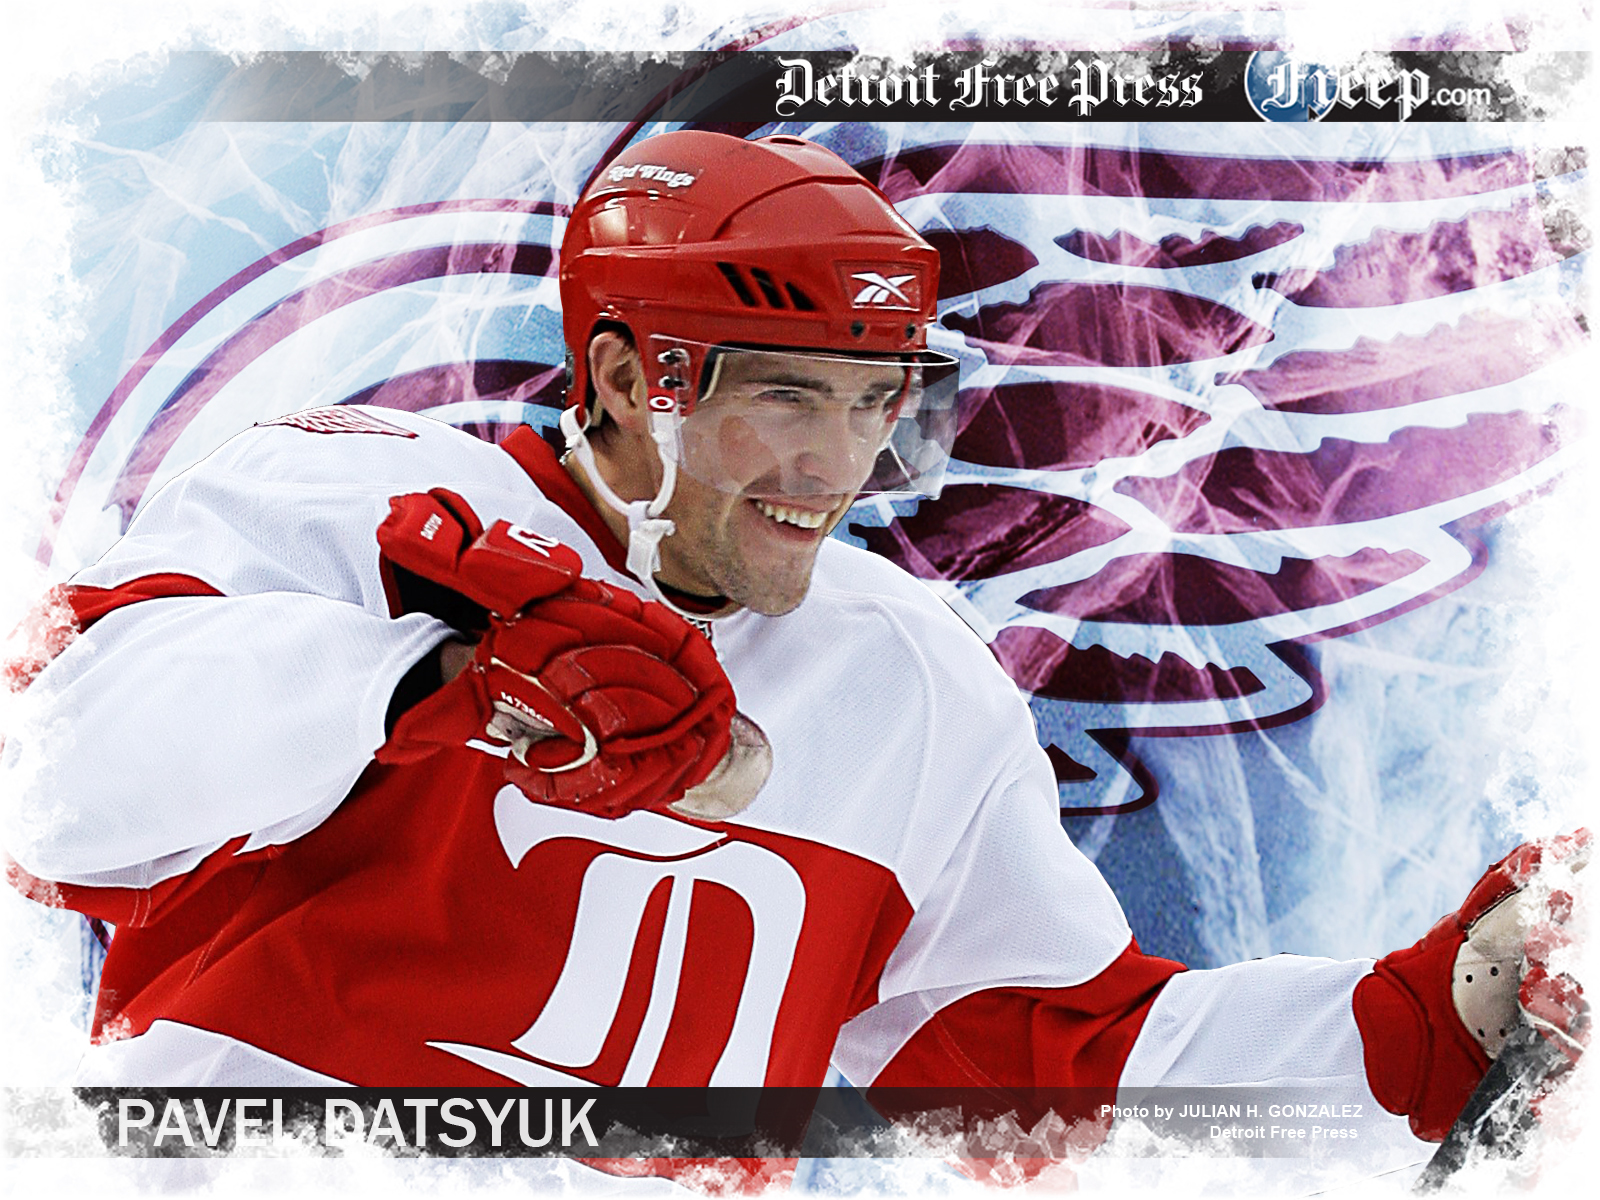 Pavel Datsyuk Wallpaper And Image Pictures Photos